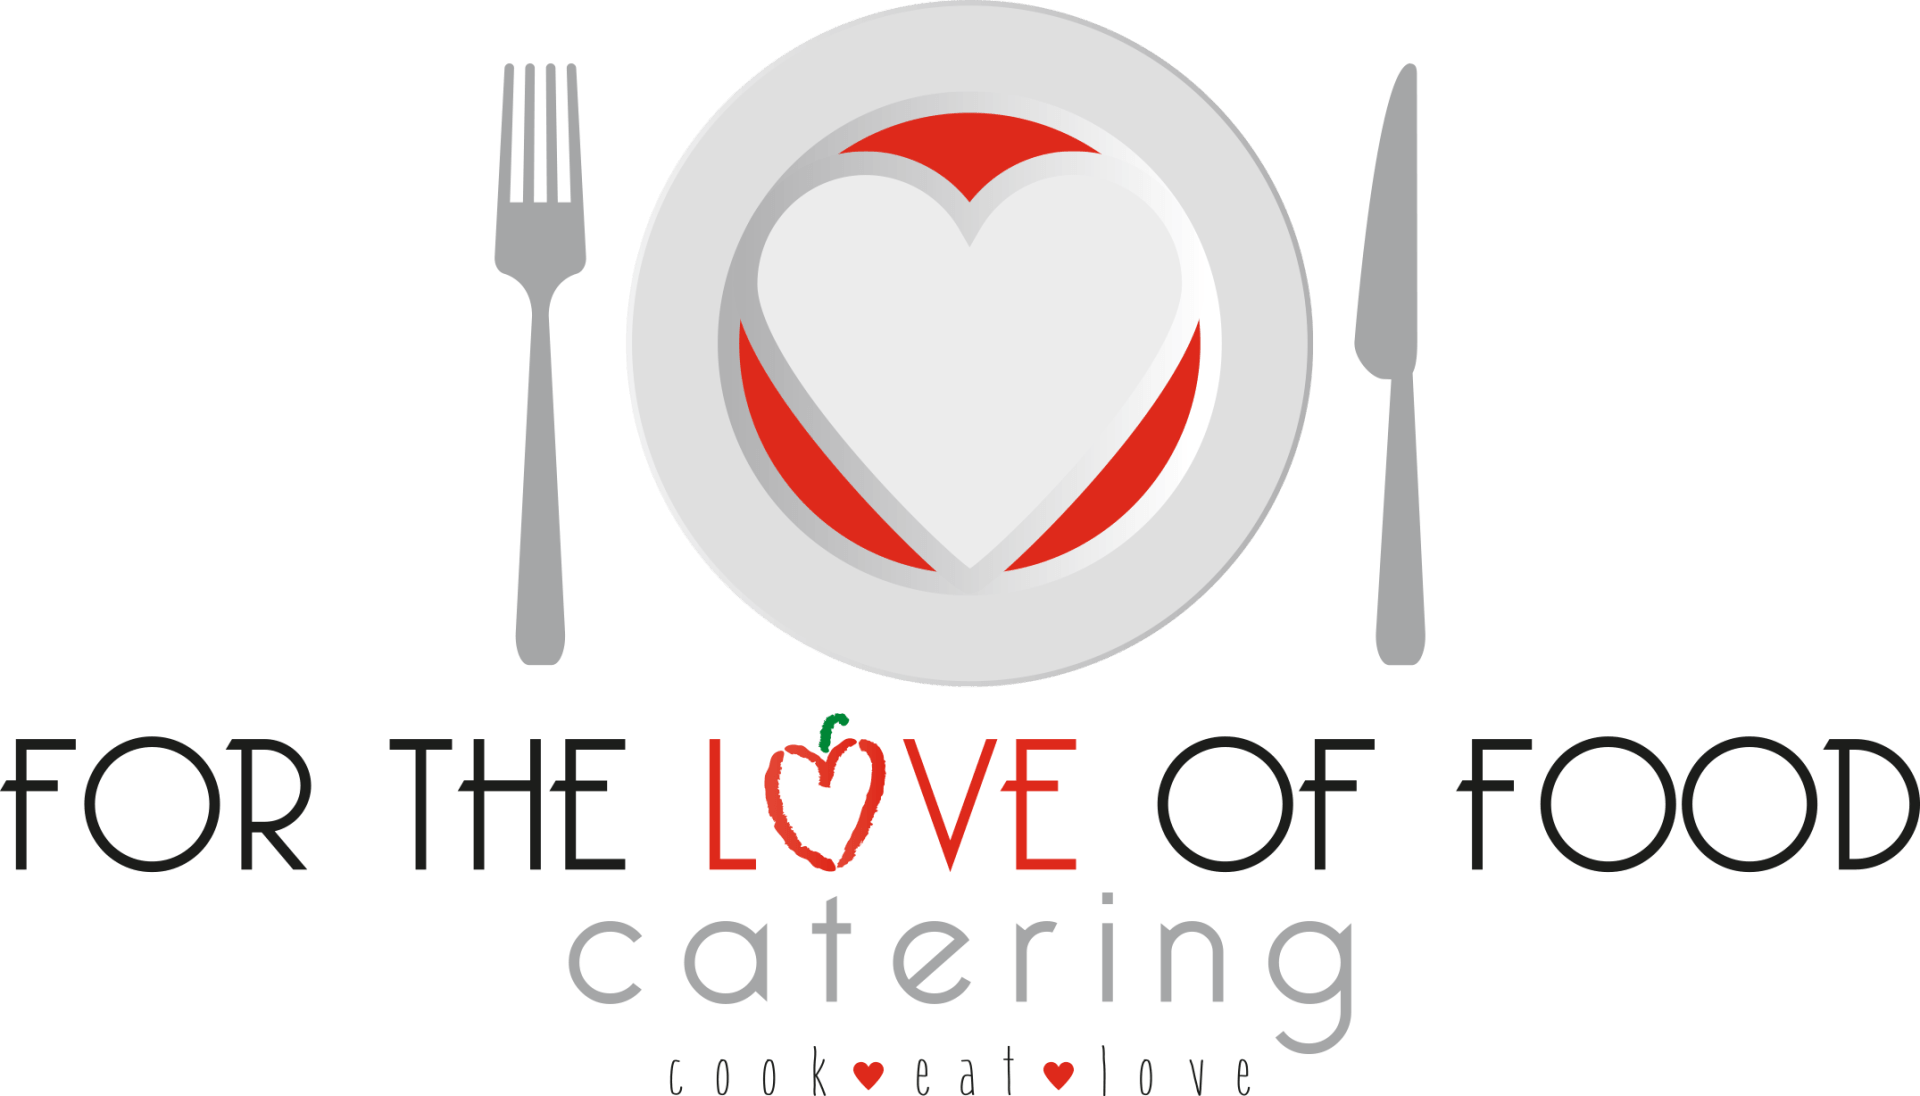 For the love of food catering Barton Vermont